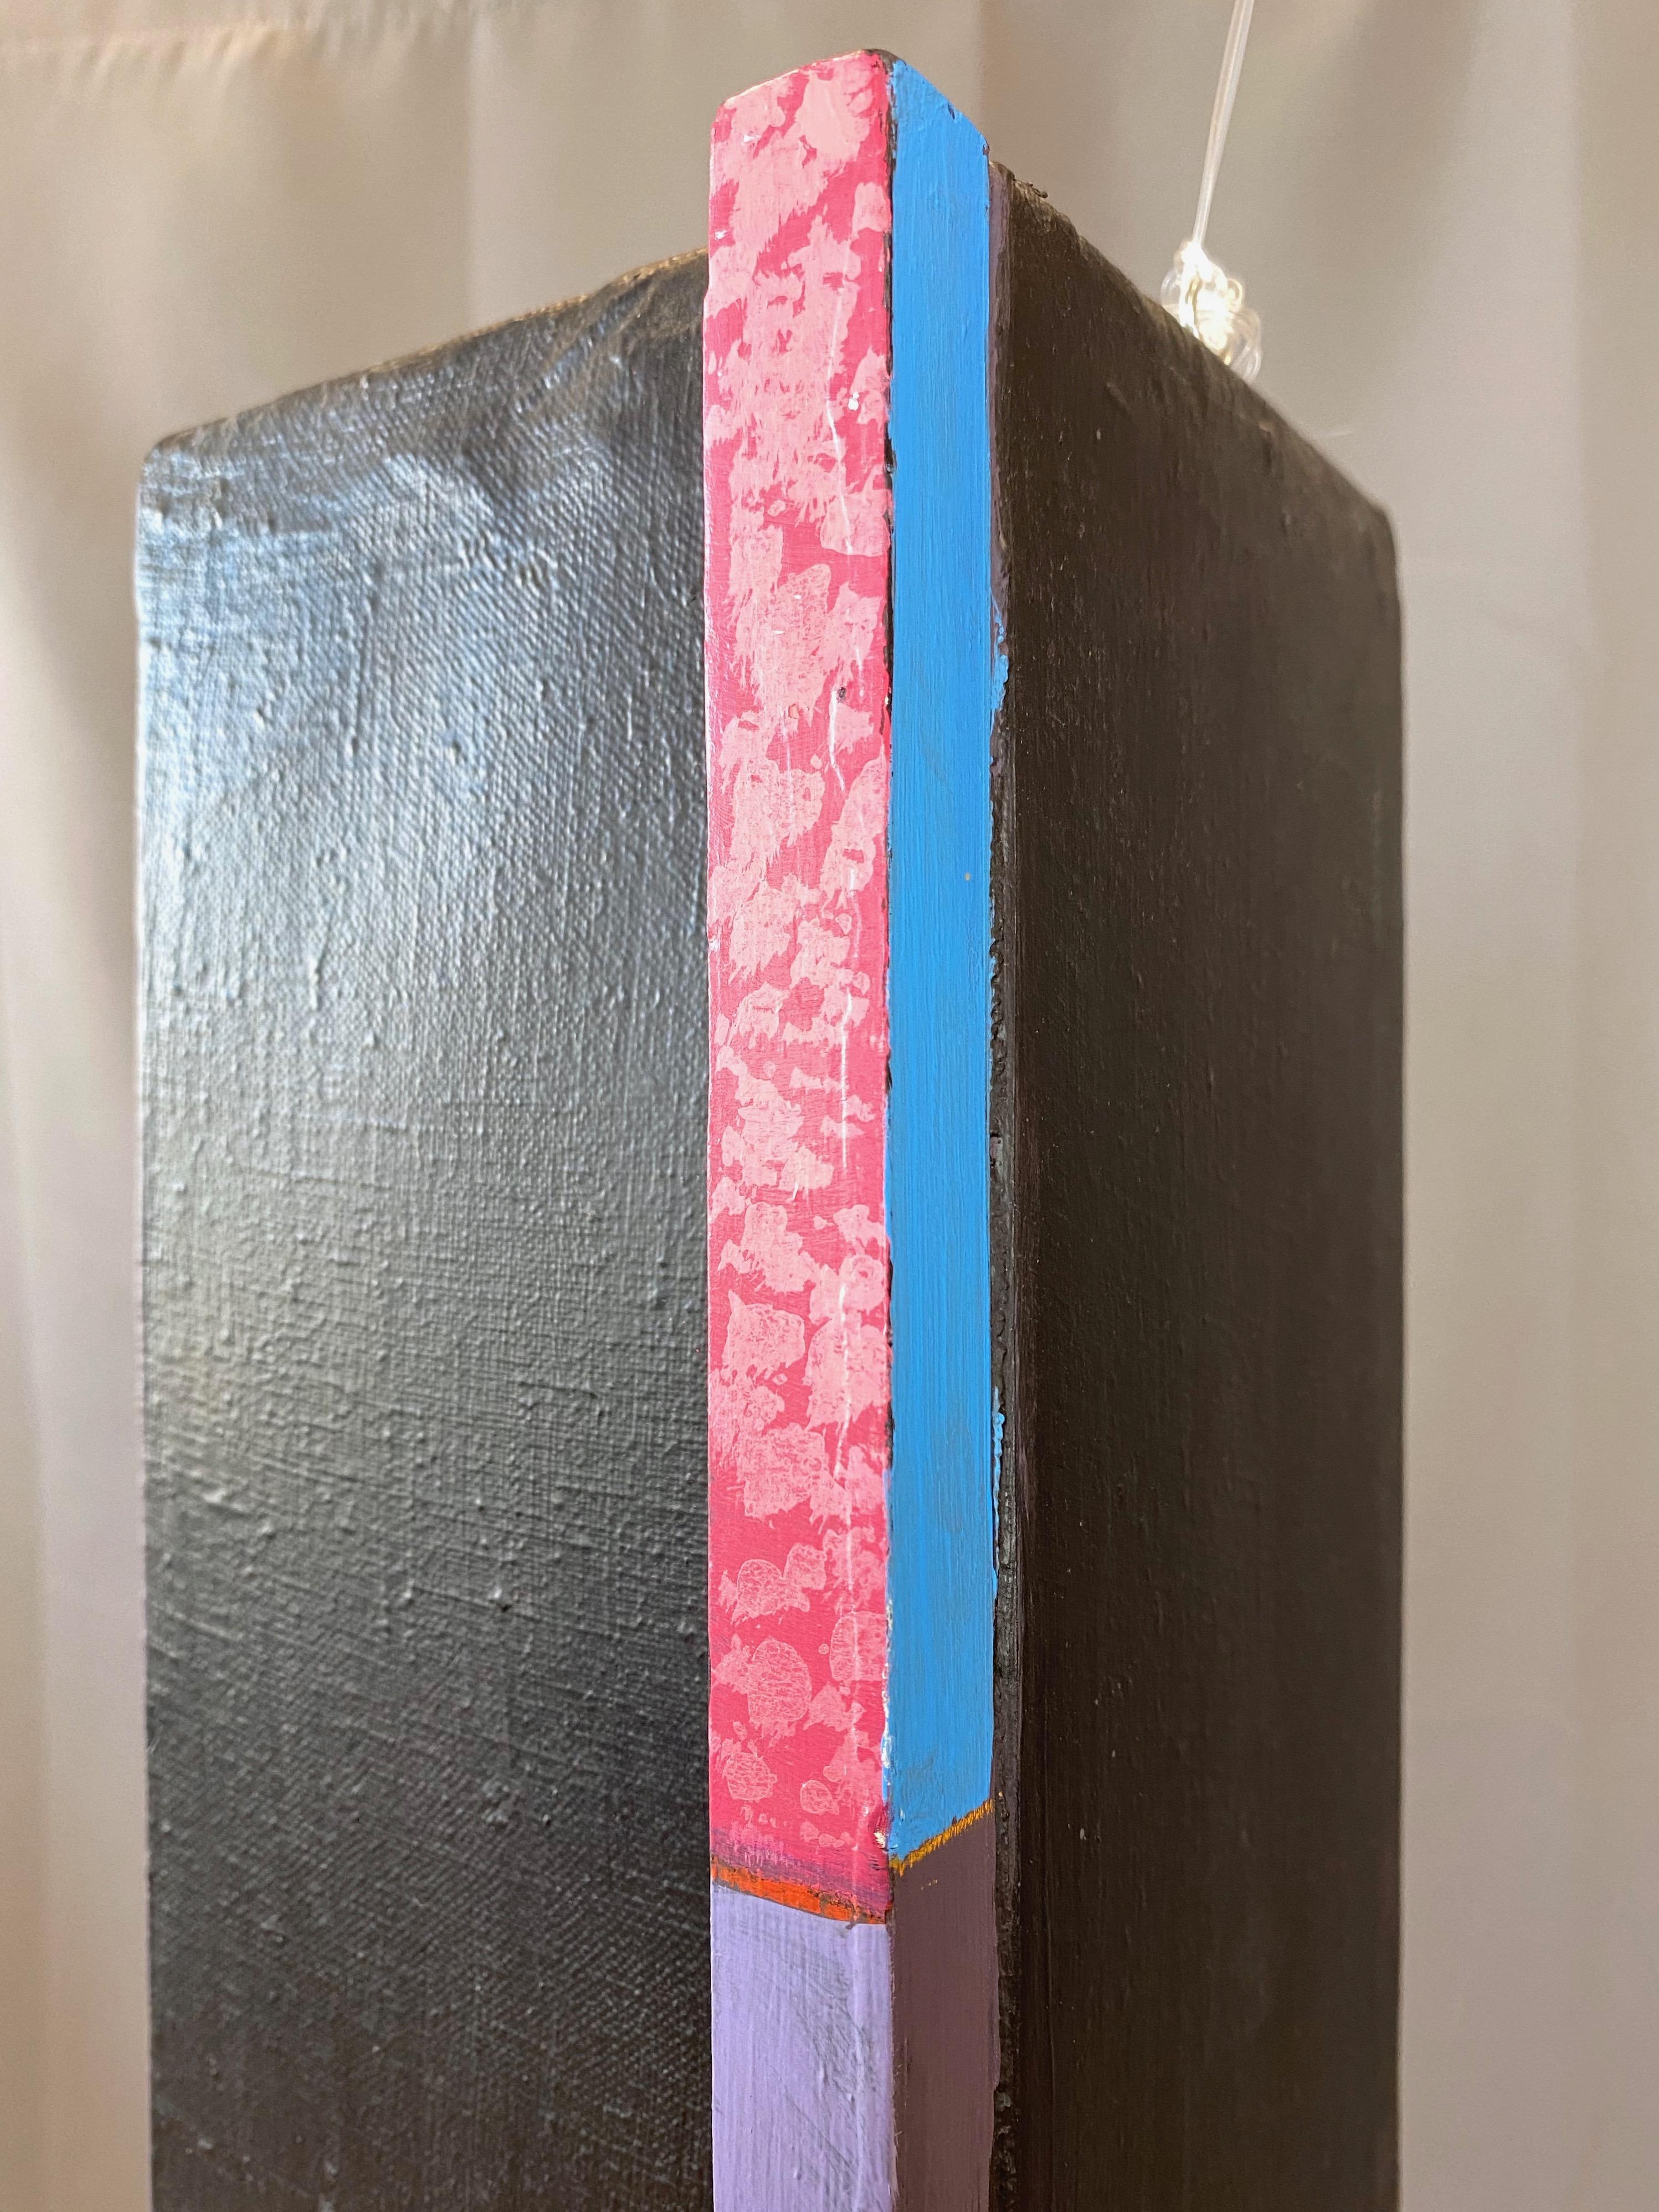 Robert English, Towering Abstract Memphis-Style Four-Sided Painting, 1980s For Sale 9